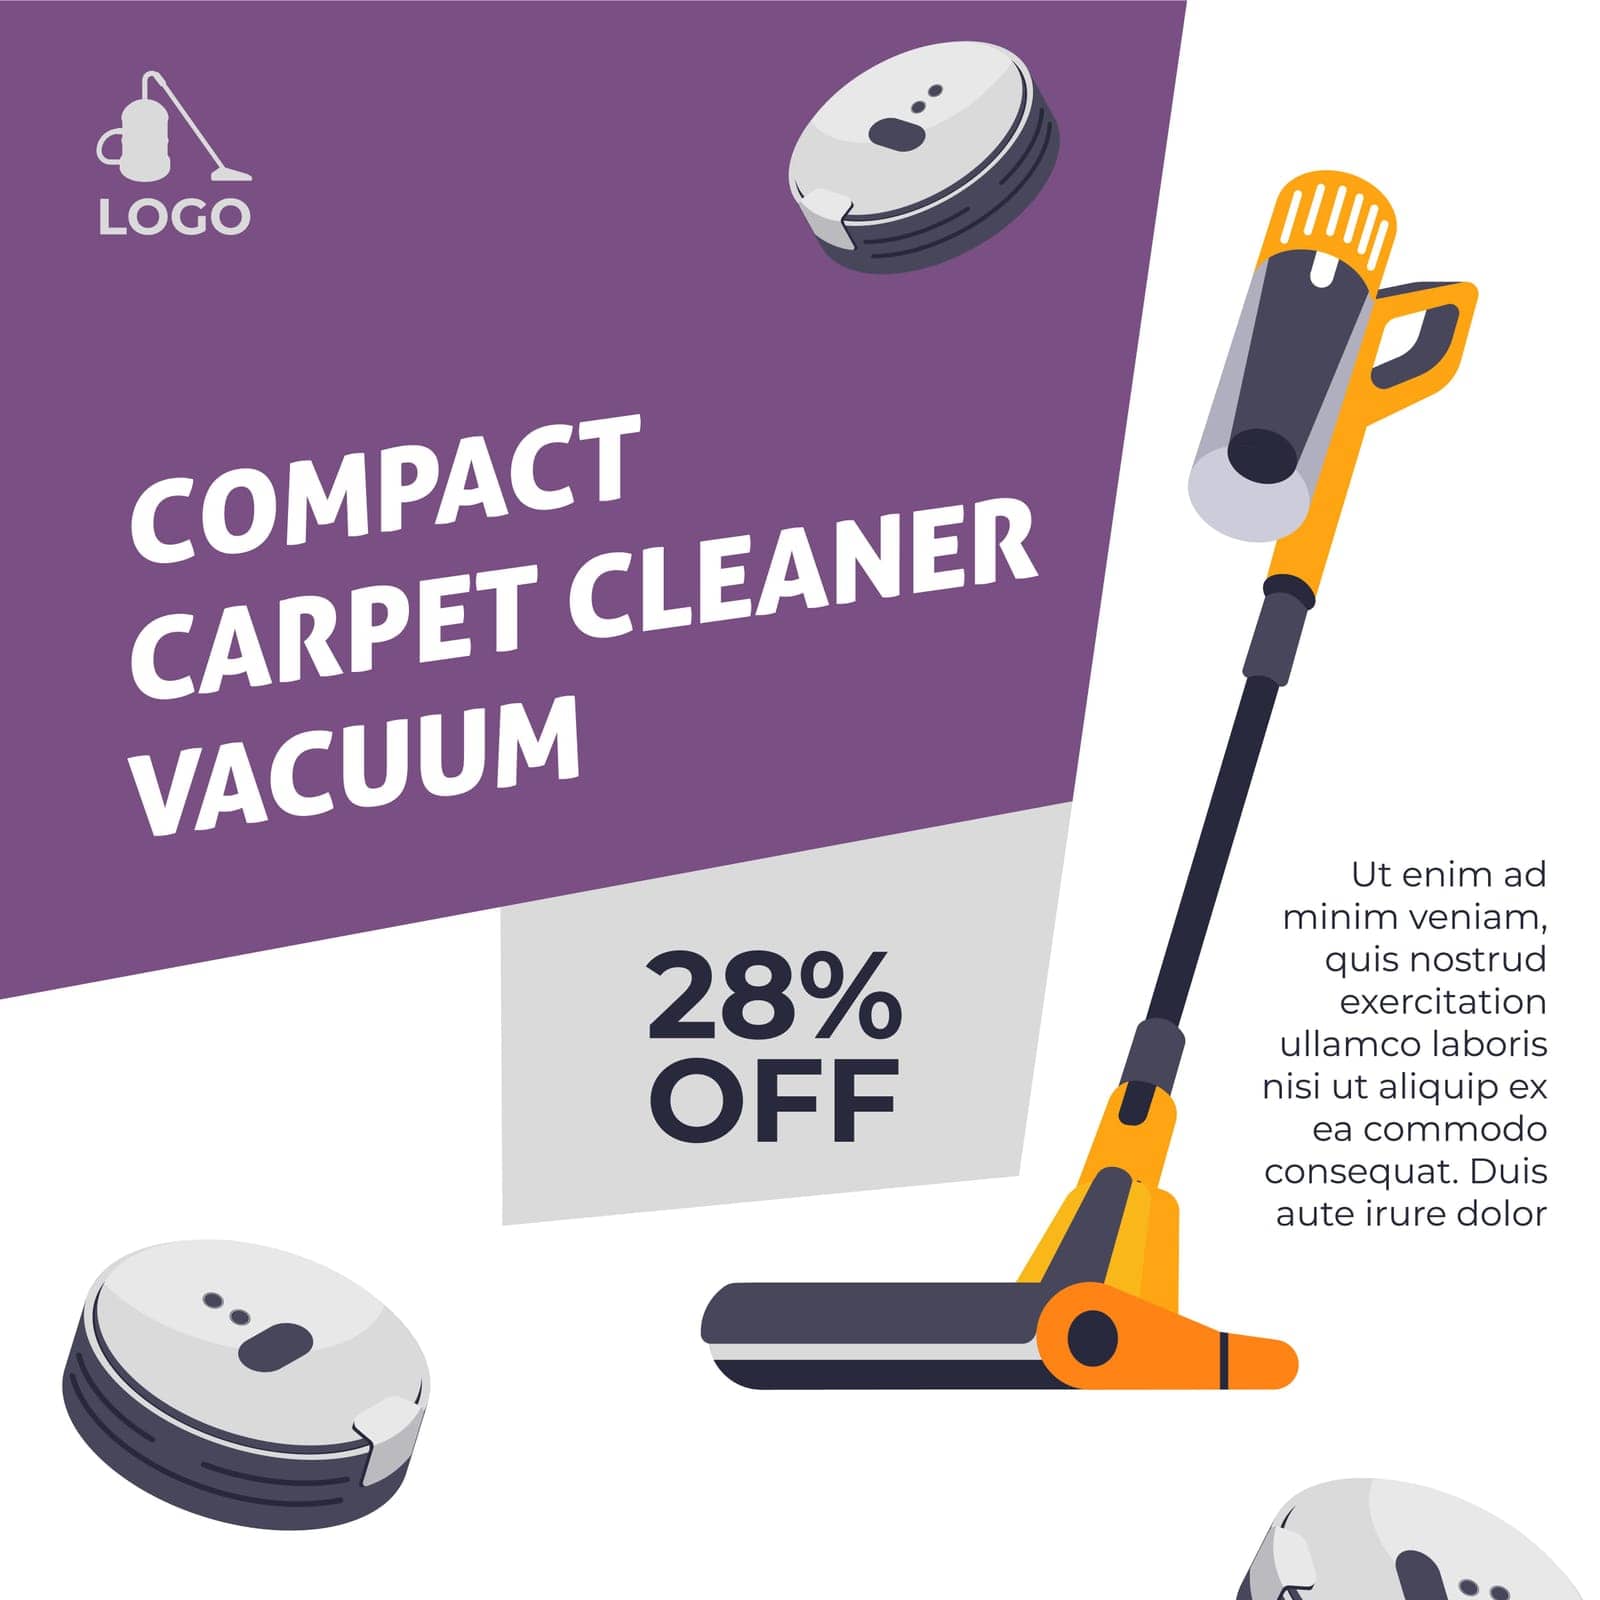 Compact carpet cleaner vacuum, price off banner by Sonulkaster